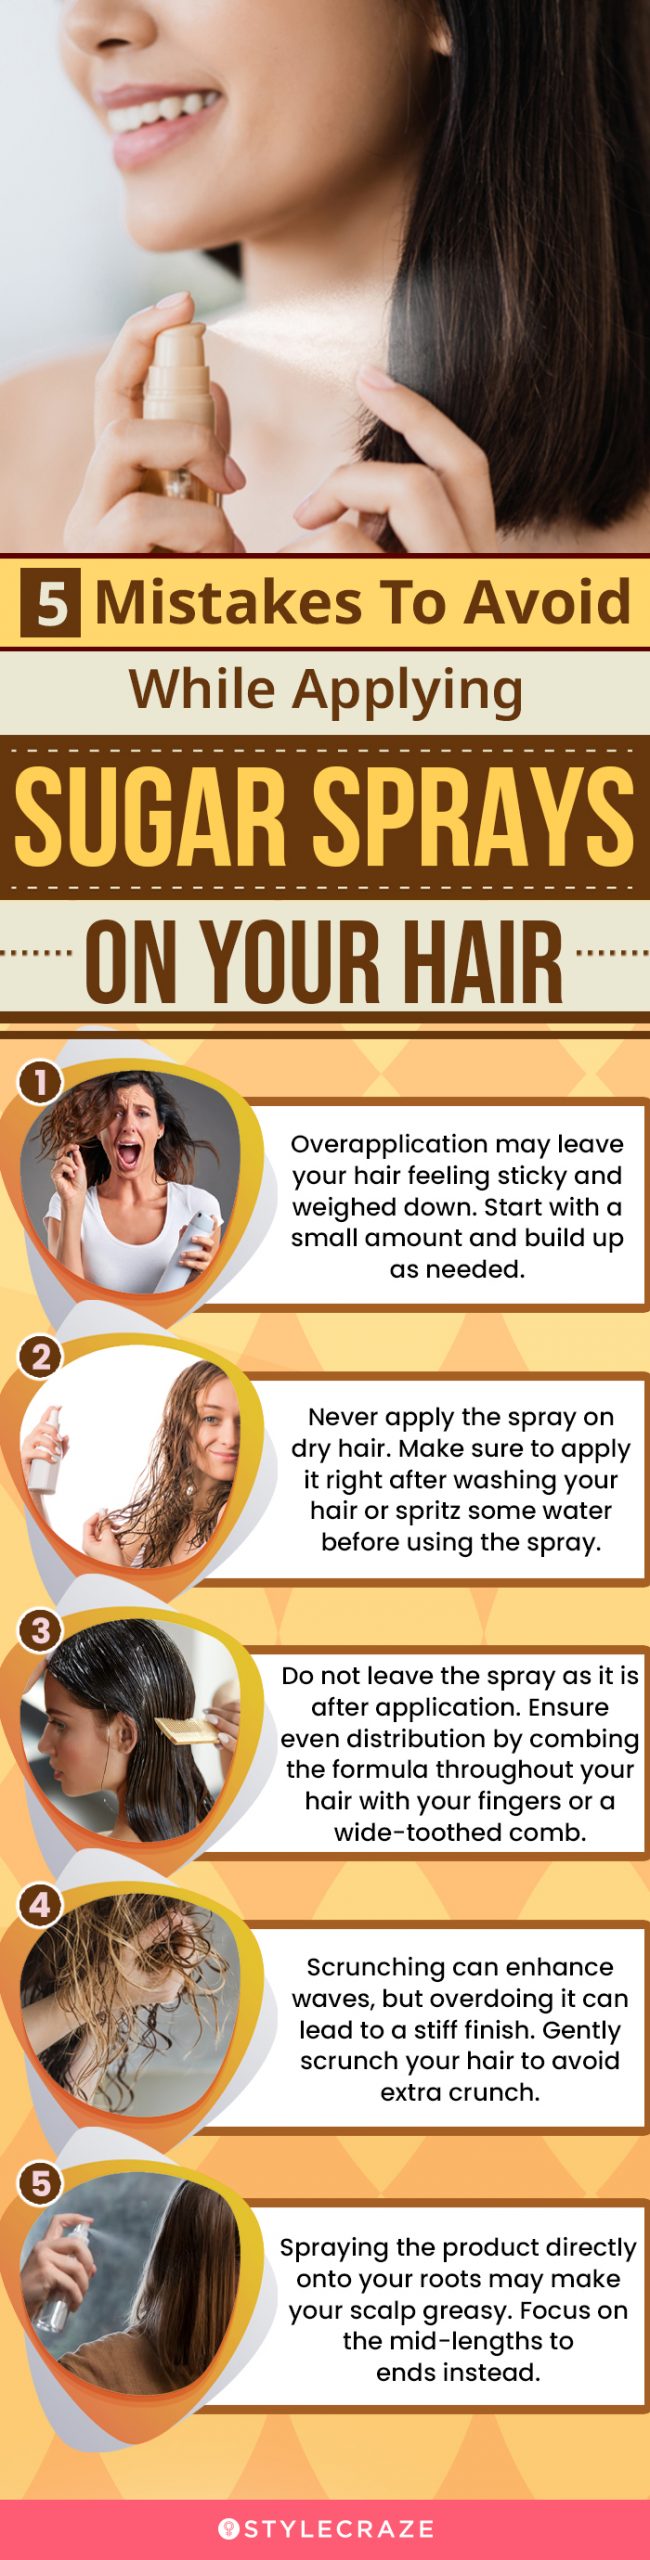 5 Mistakes To Avoid While Applying Sugar Sprays On Your Hair (infographic)